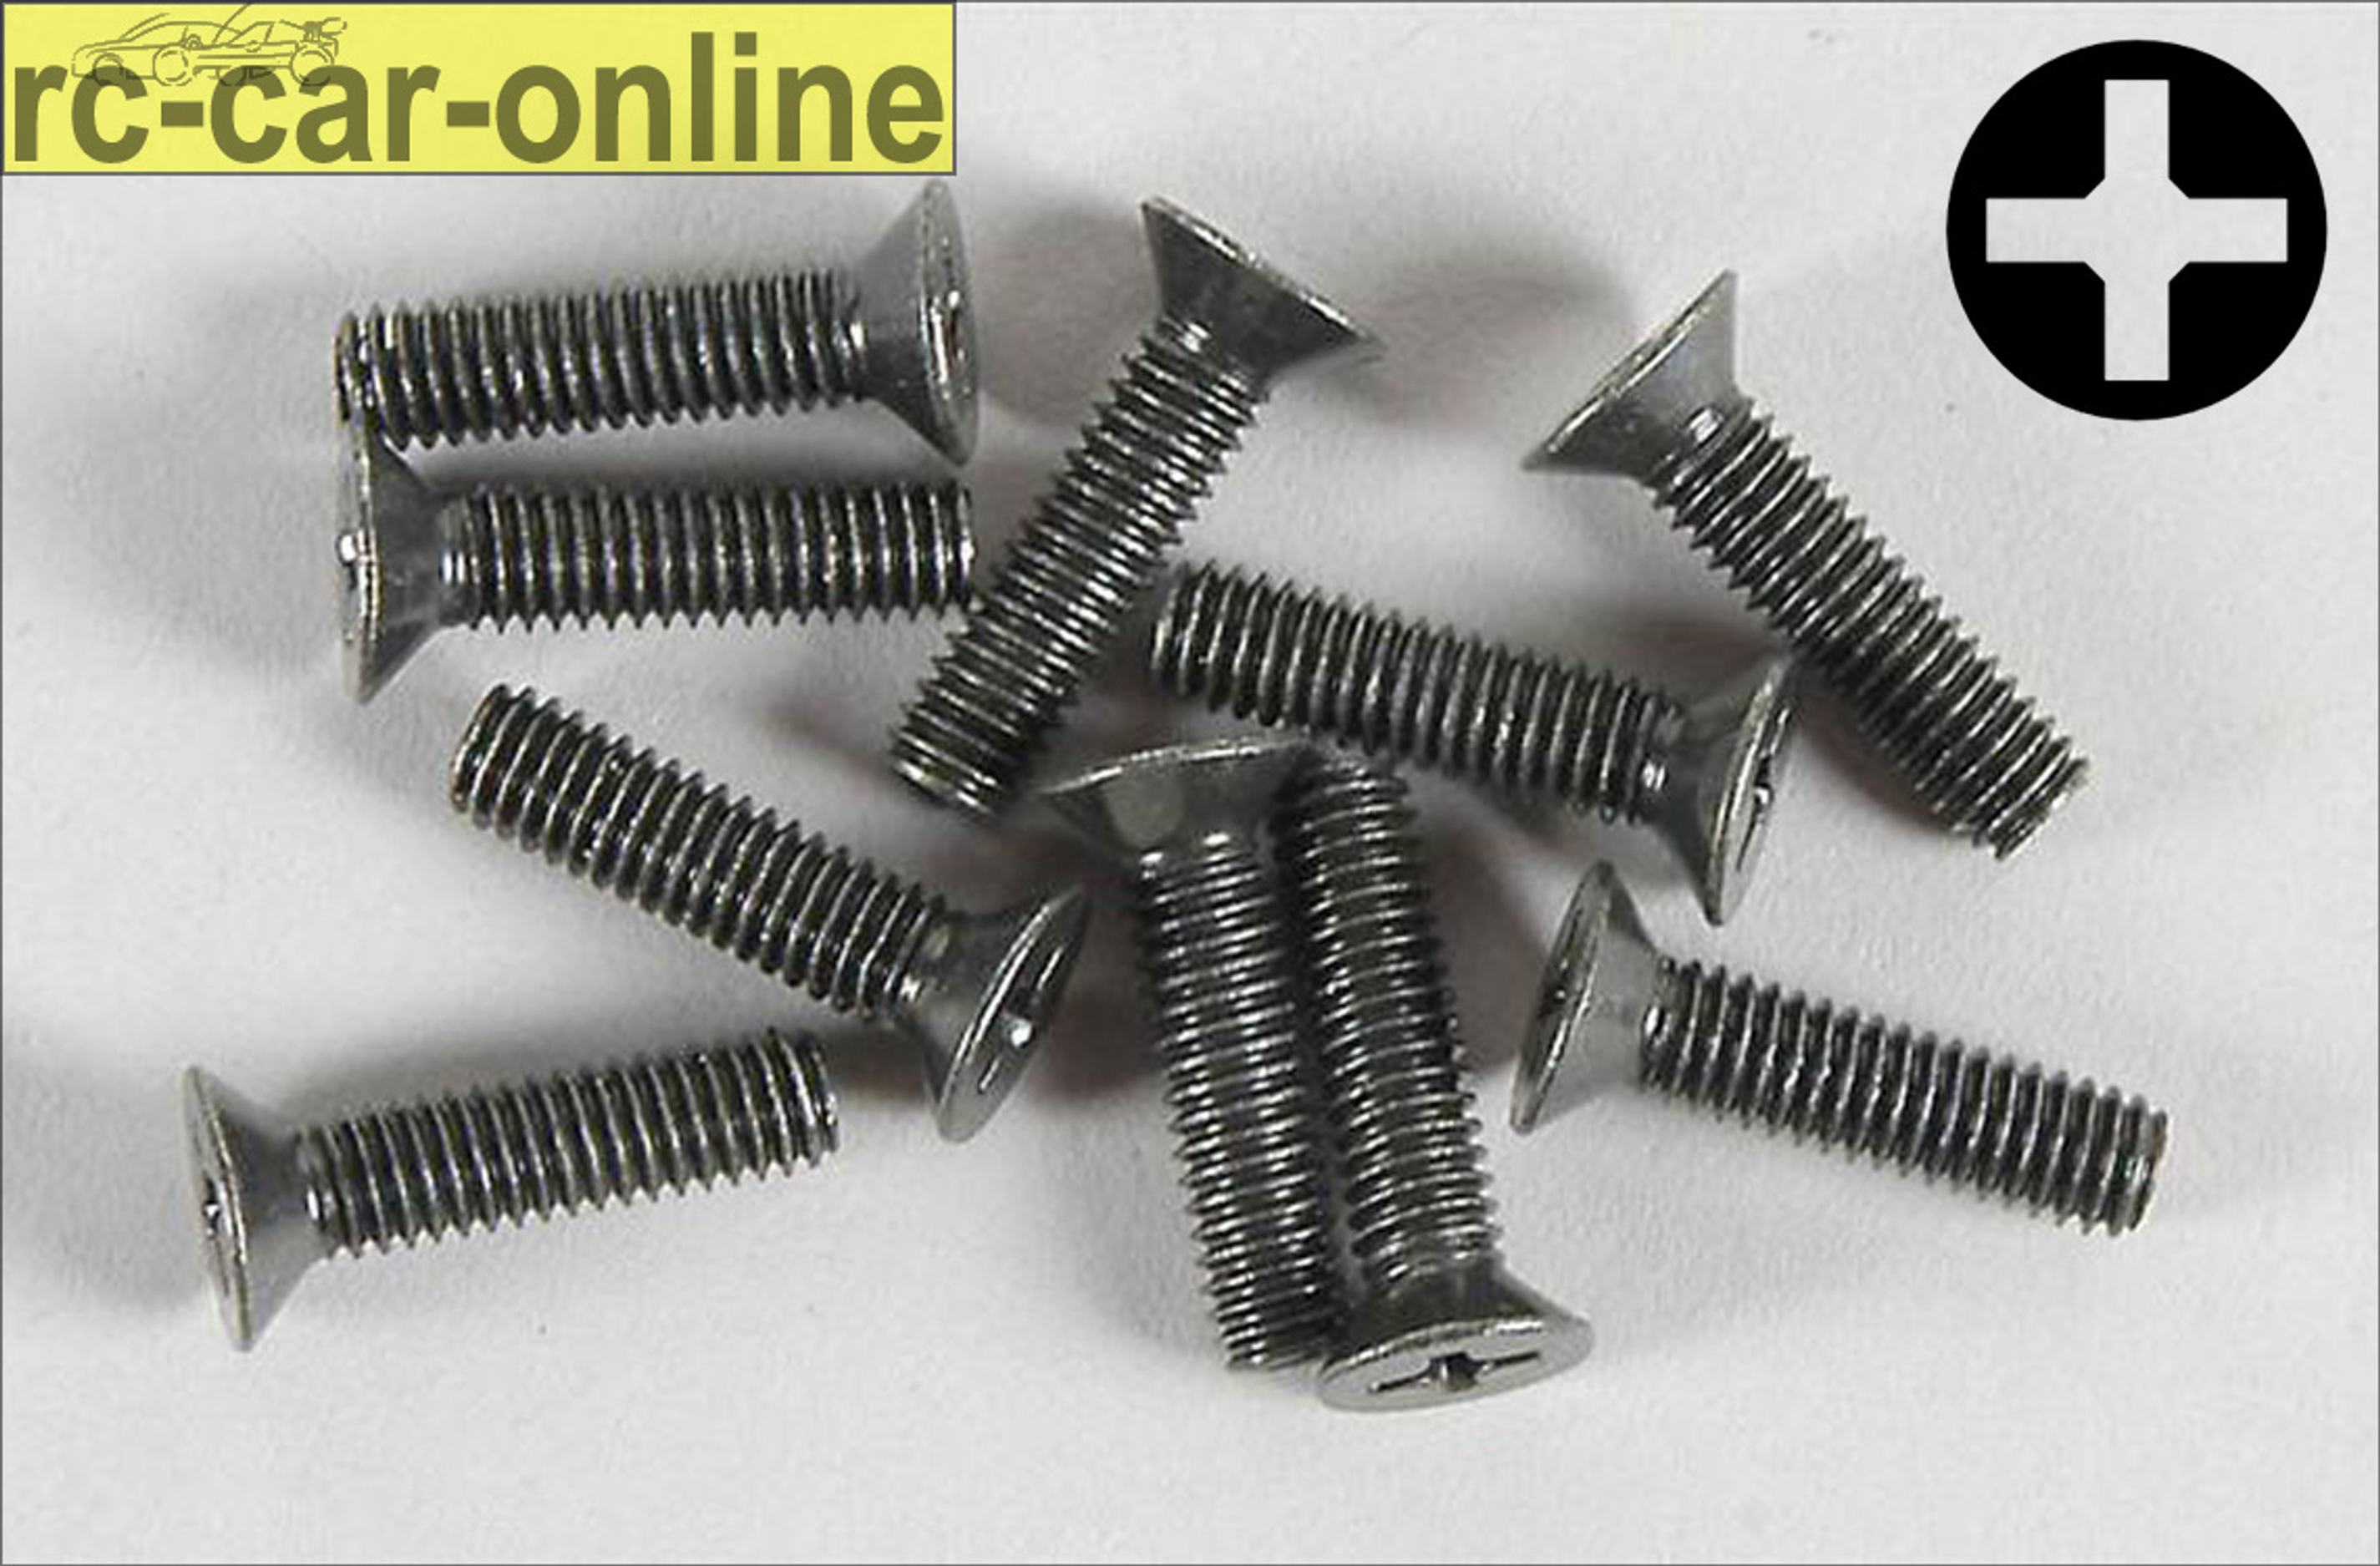 6718/16 FG Countersunk screw with cross recess M4x16 mm, 10 pieces